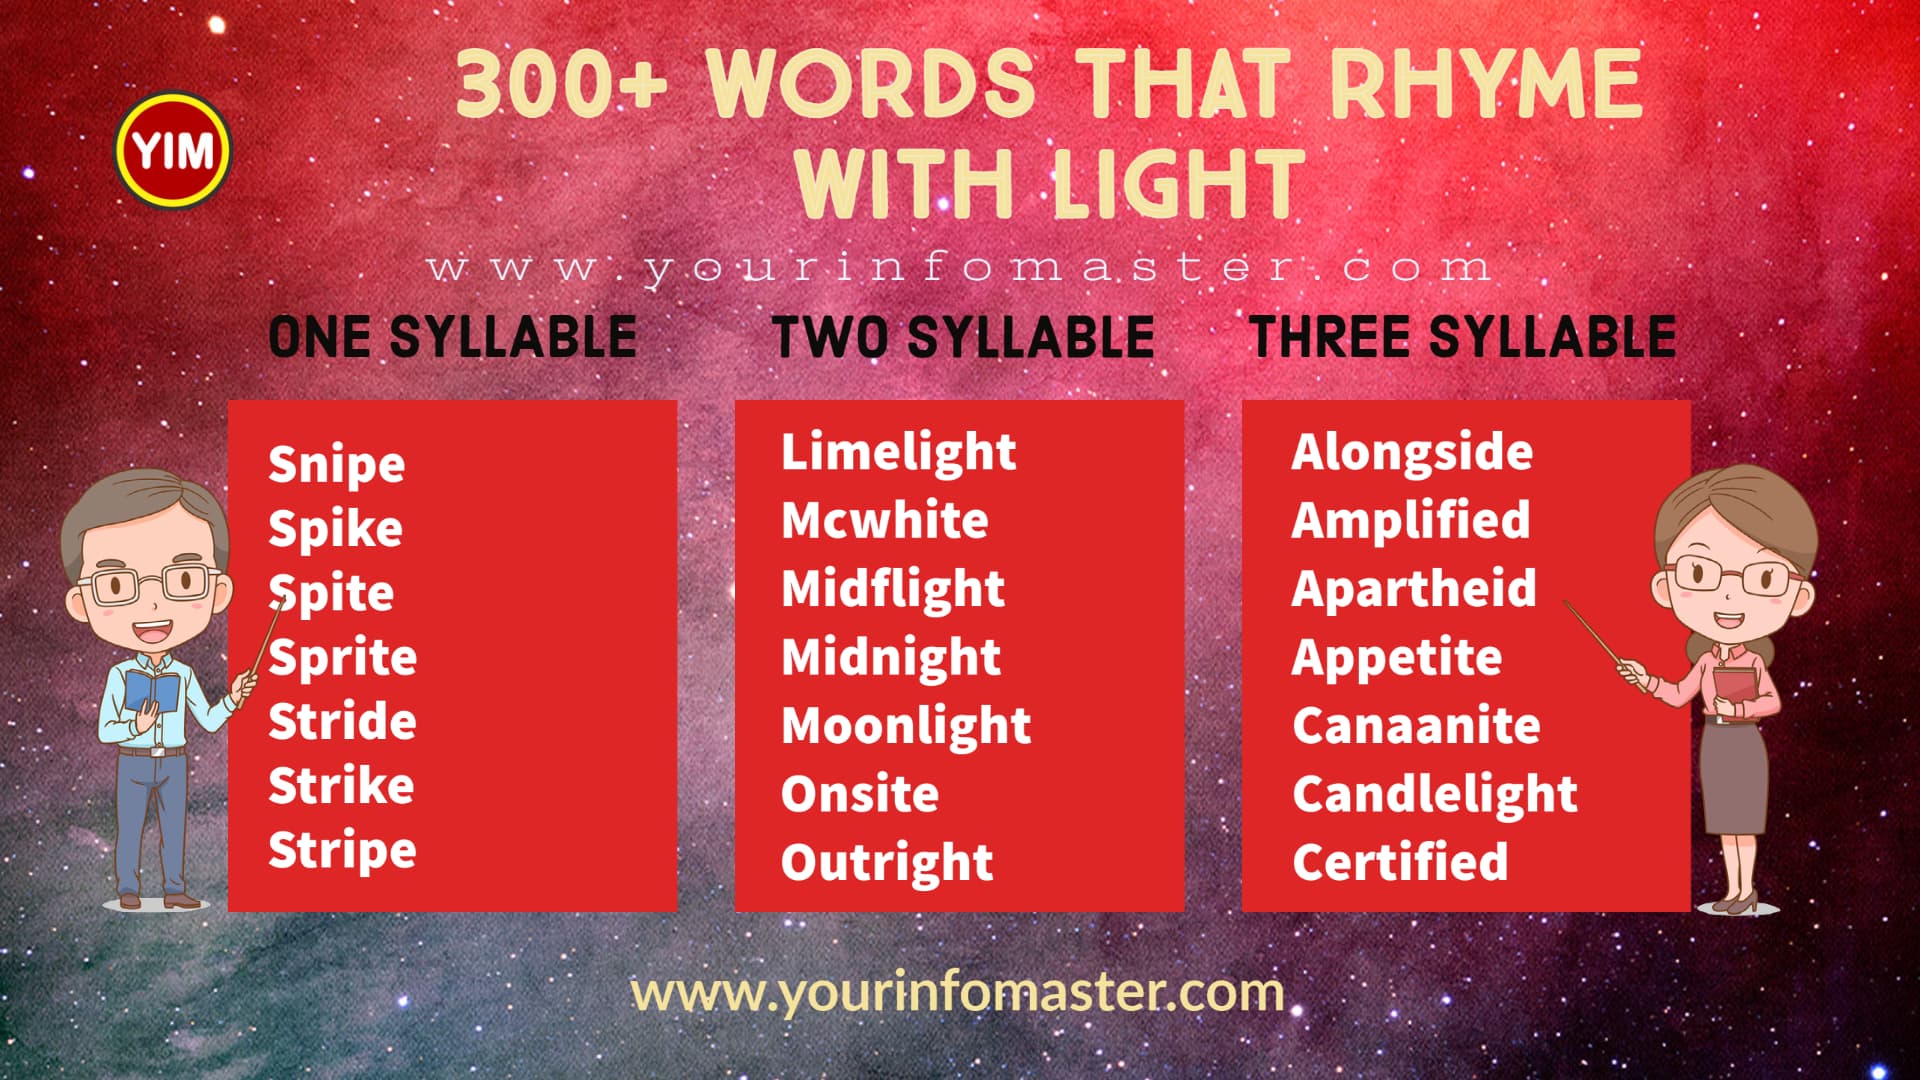 100 rhyming words, 1000 rhyming words, 200+ Interesting Words, 200+ Useful Words, 300 rhyming words list, 50 rhyming words list, 500 rhyming words, all words that rhyme with Light, Another word for Light, are rhyming words, how to teach rhyming words, Interesting Words that Rhyme in English, Light rhyme, Light rhyme examples, Light Rhyming words, Printable Infographics, Printable Worksheets, rhymes English words, rhymes with Light infographics, rhyming pairs, Rhyming Words, Rhyming Words for Kids, rhyming words for Light, Rhyming Words List, Things that rhyme with Light, what are rhyming words, what rhymes with Light, words rhyming with Light, Words that Rhyme, Words That Rhyme with Light